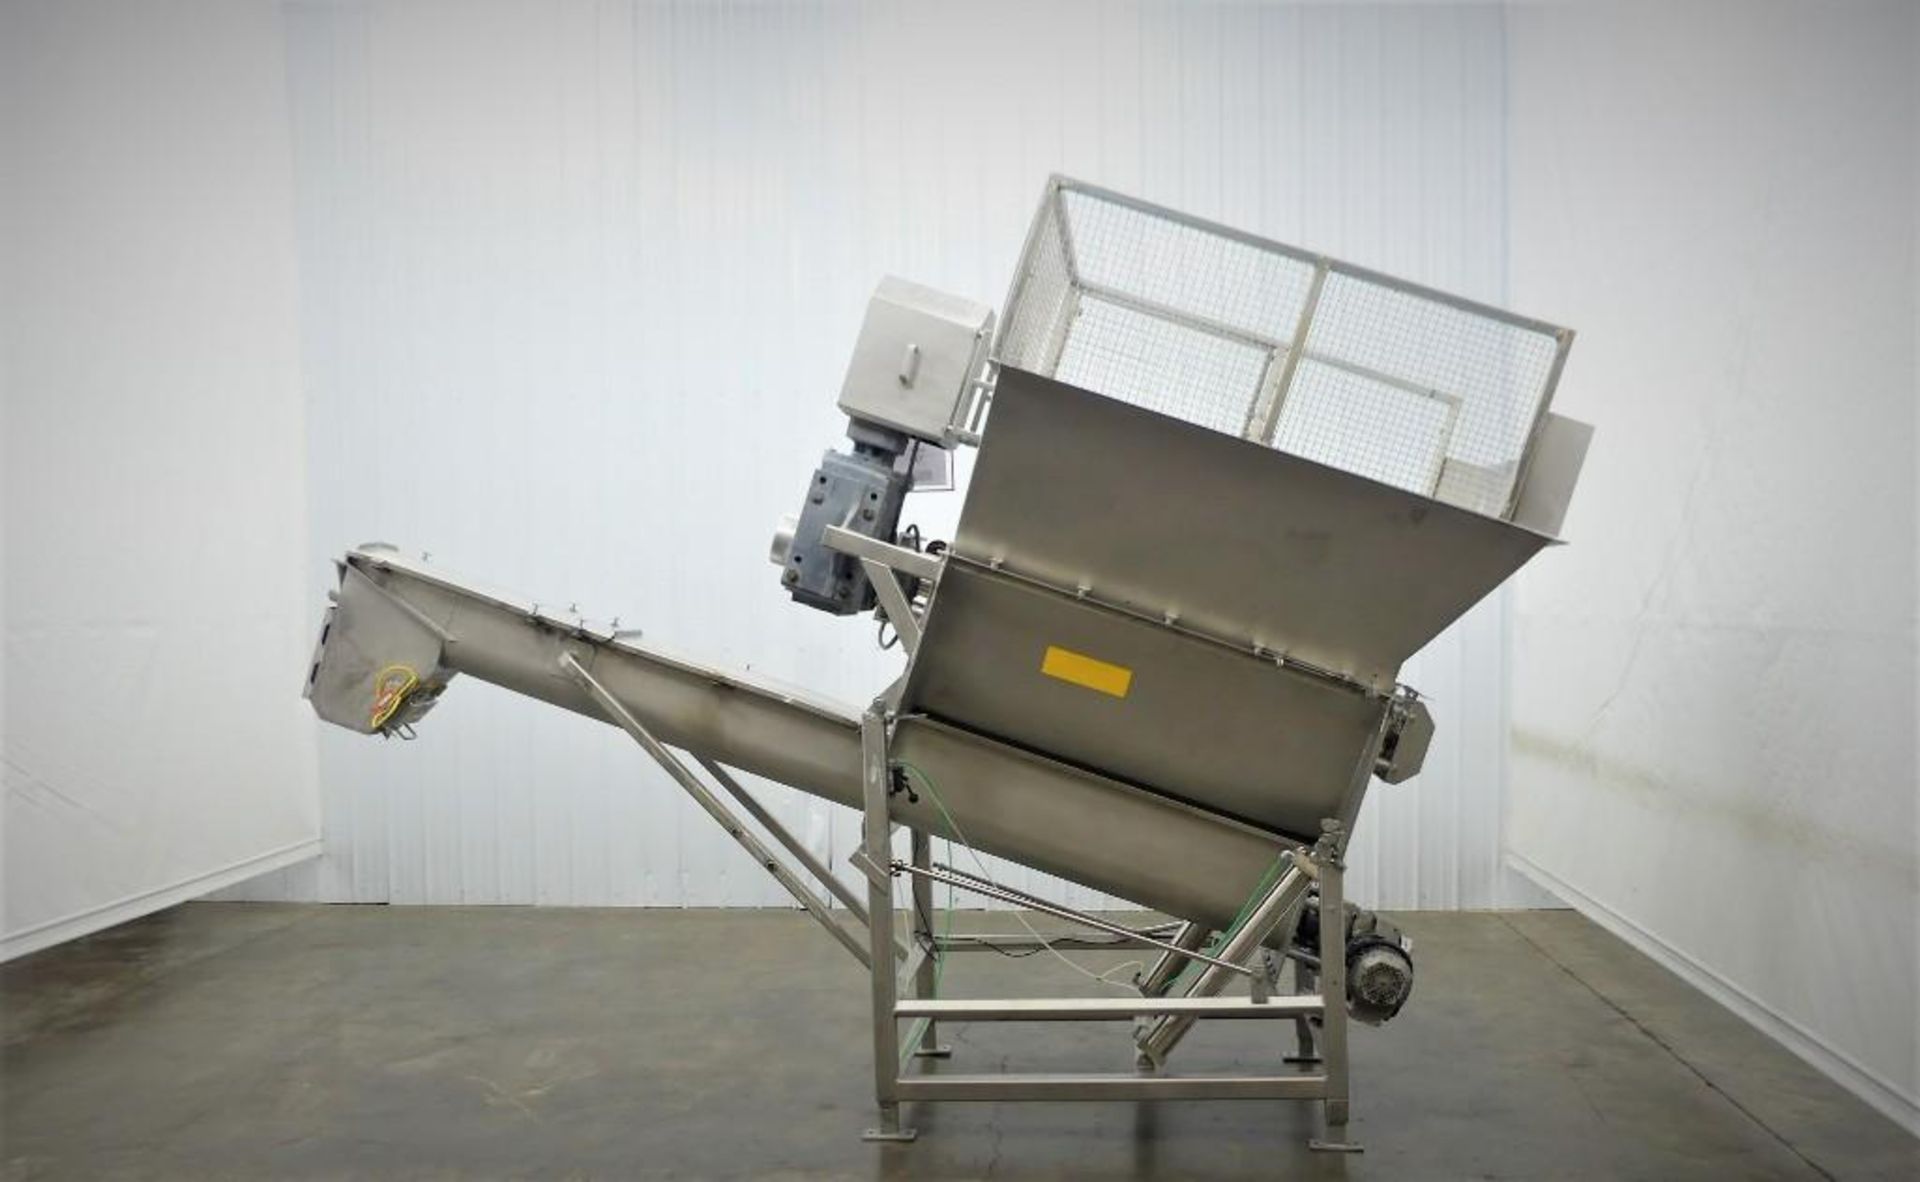 Material Transport MTC 10 12 FB Auger Conveyor with Hopper 1,600 Pounds